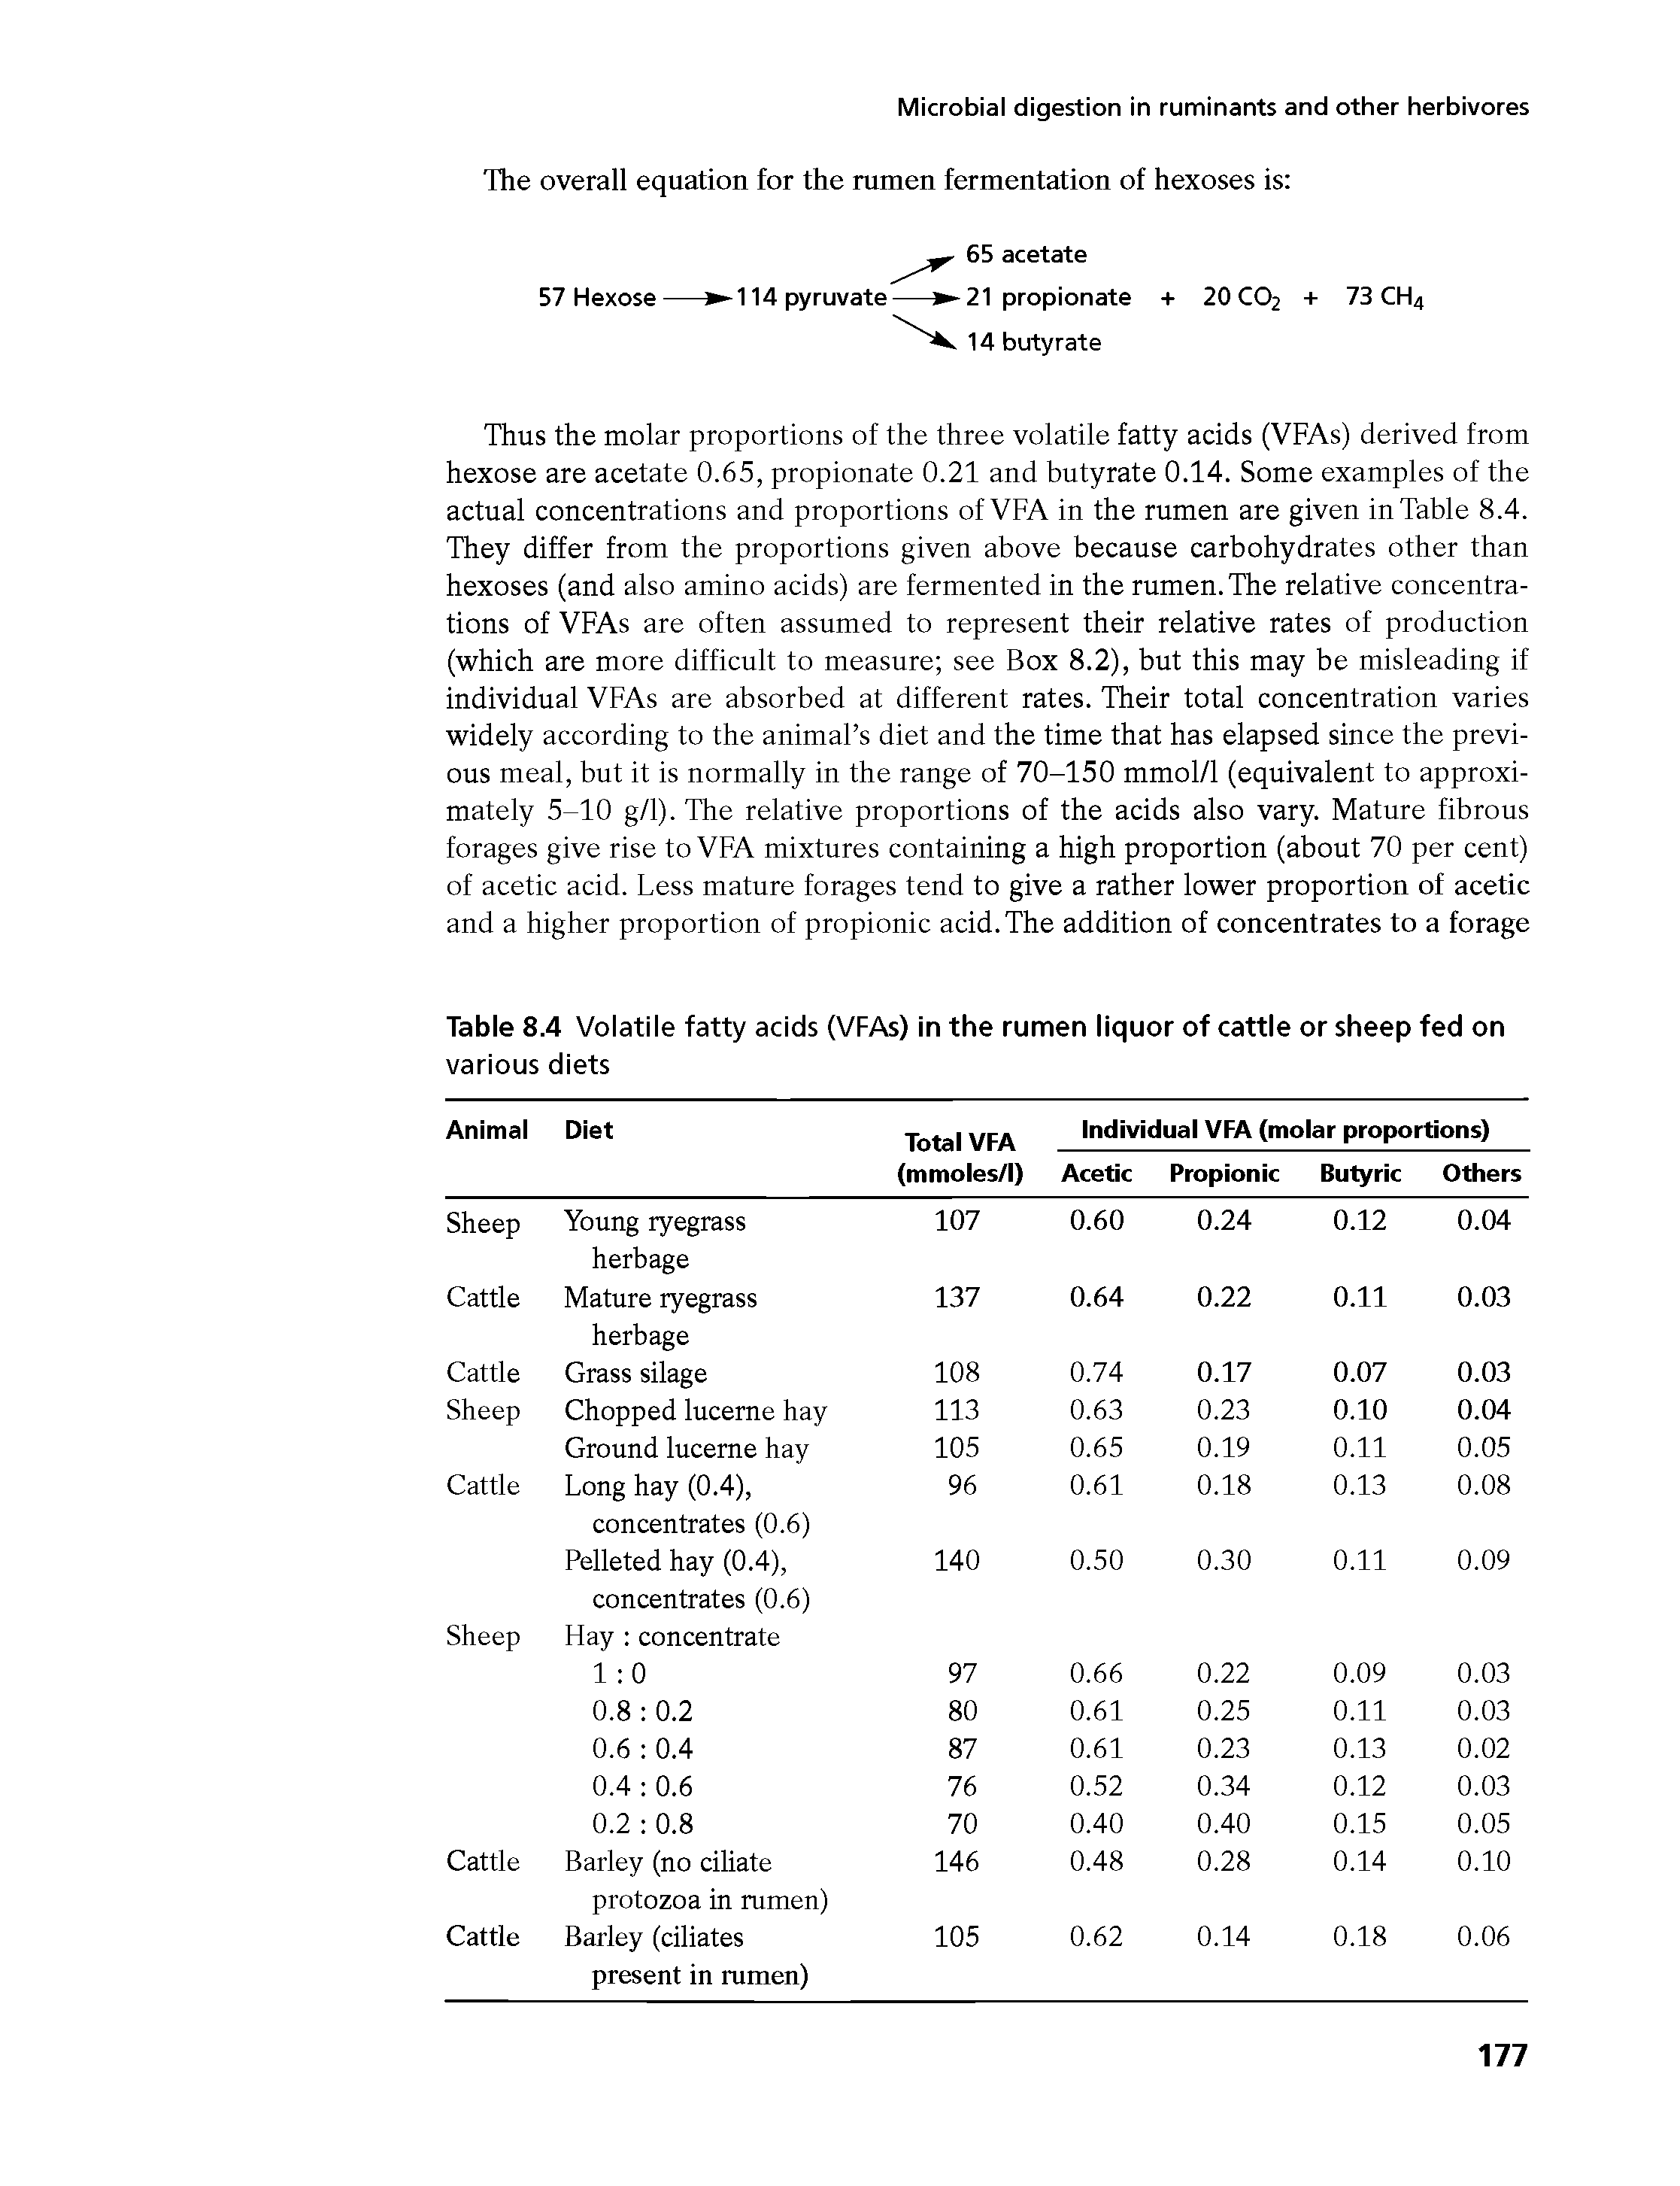 Table 8.4 Volatile fatty acids (VFAs) in the rumen liquor of cattle or sheep fed on...